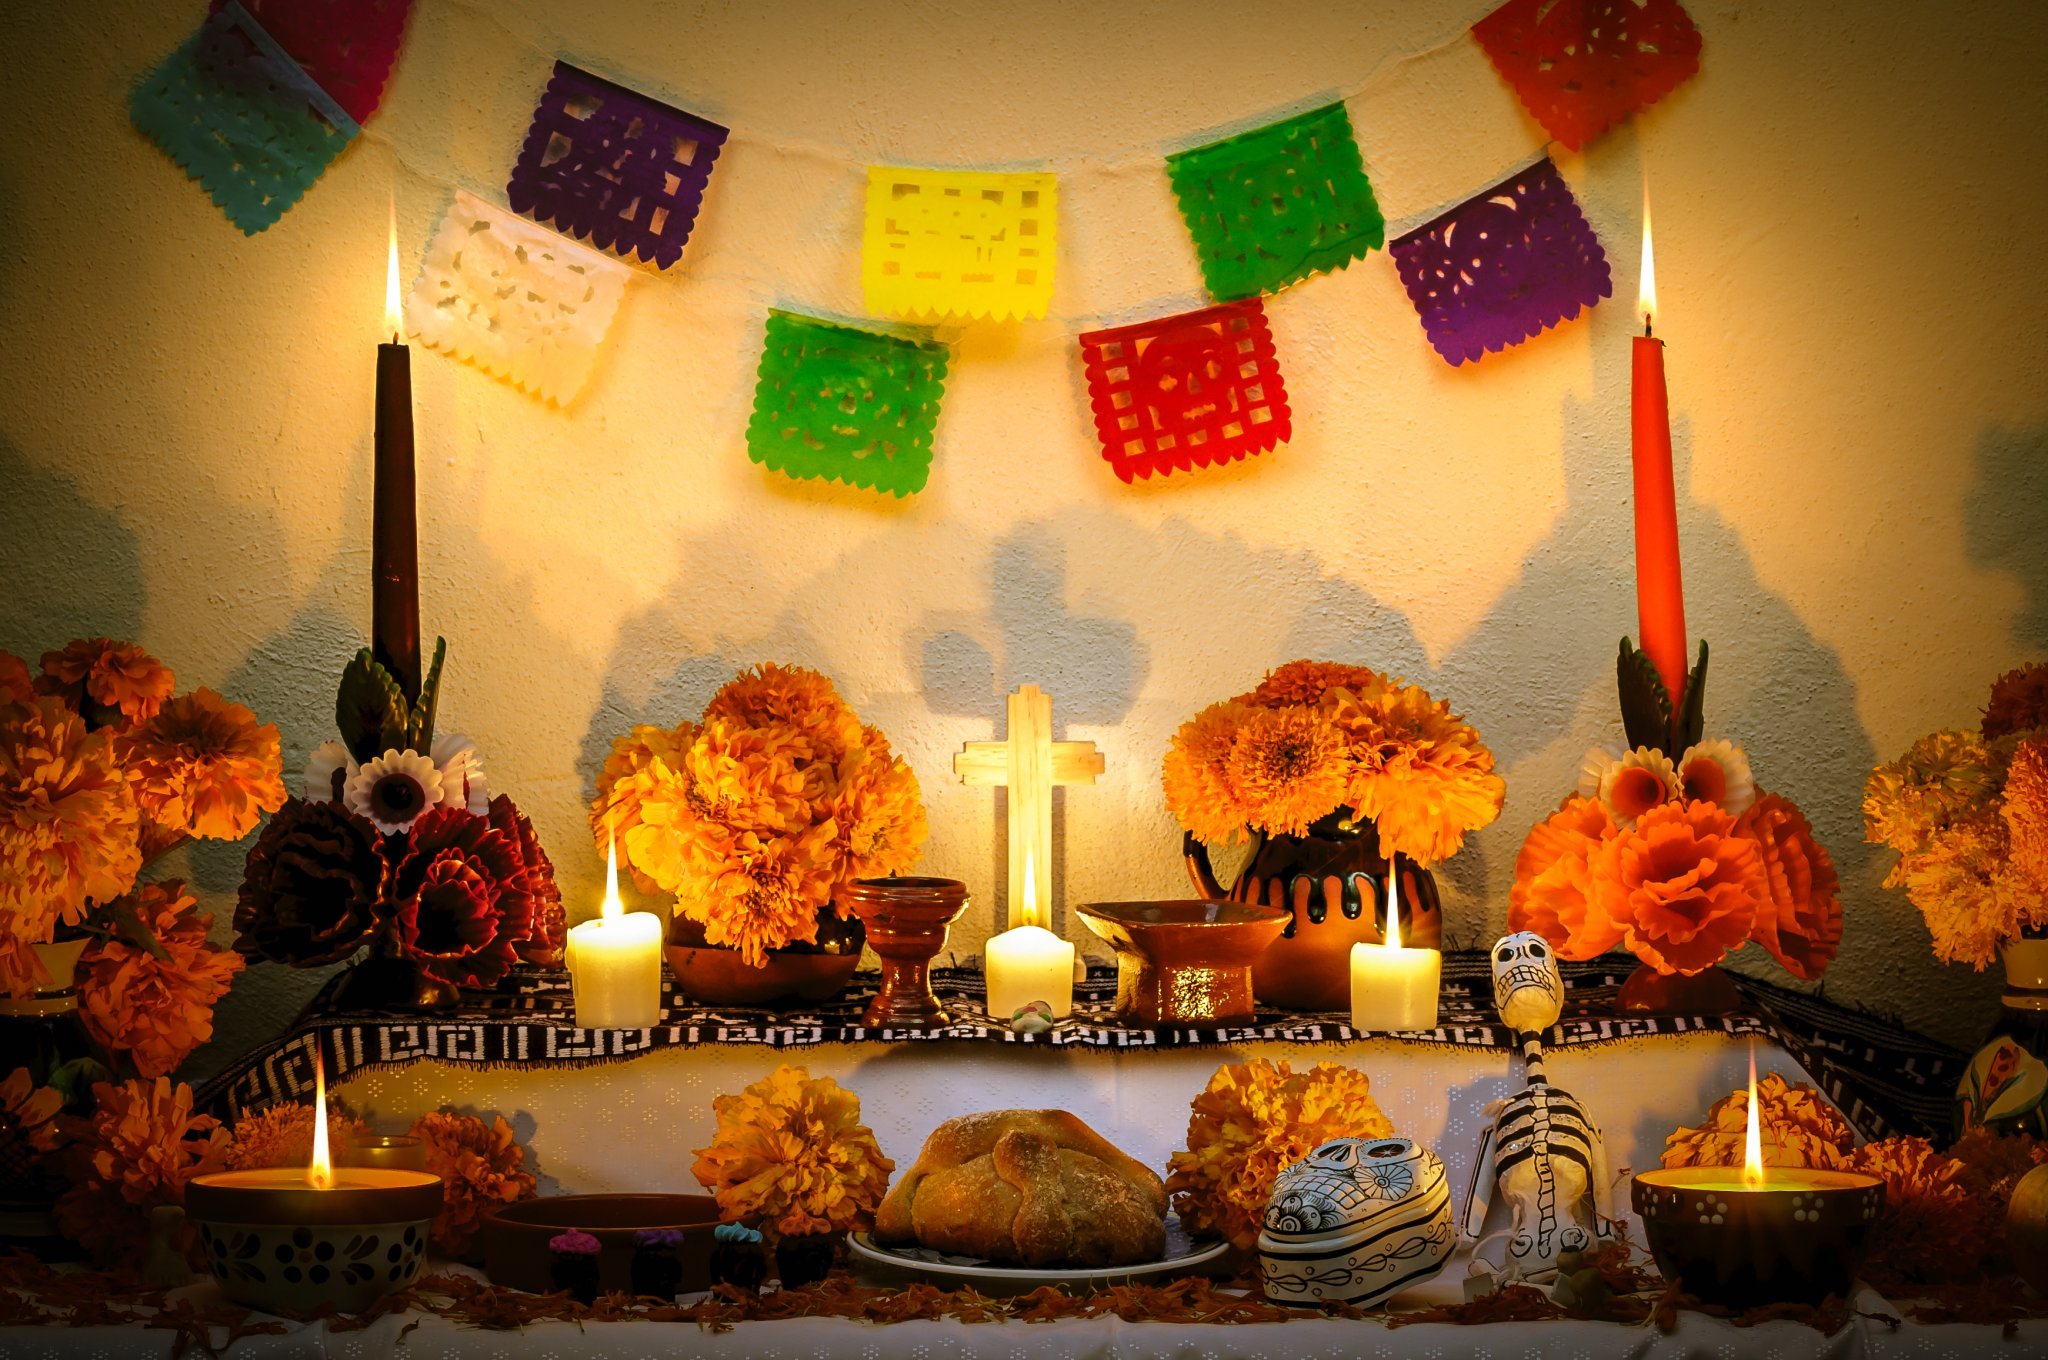 Decorate for Dia de los Muertos with These Shops from Mexico